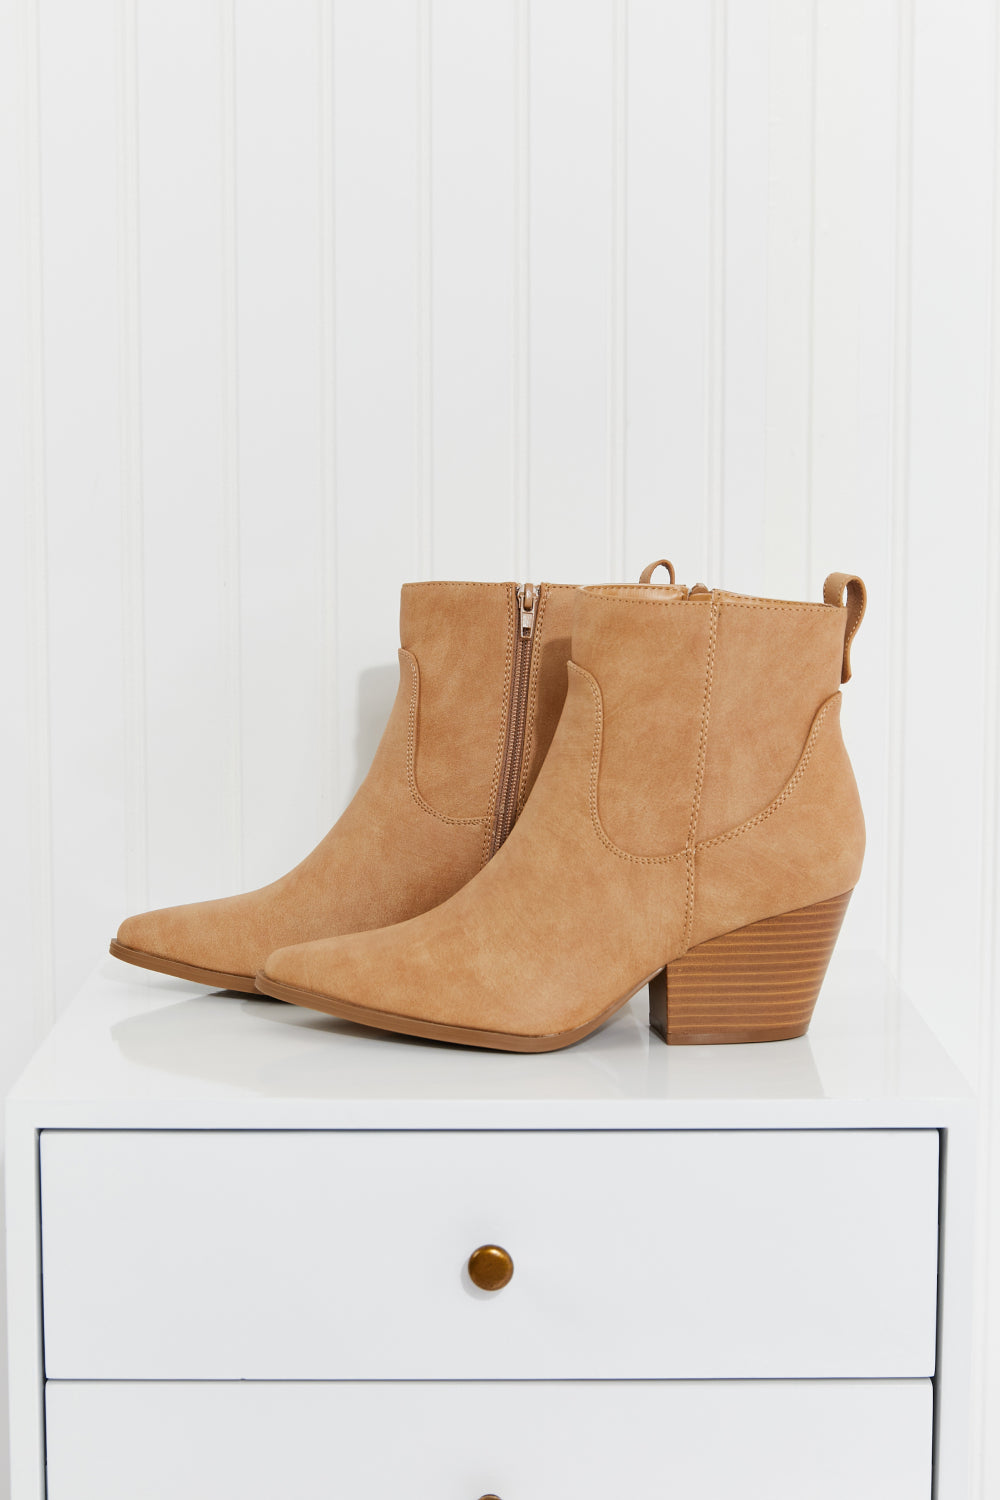 Qupid Finding Fort Worth Pointed Toe Ankle Booties